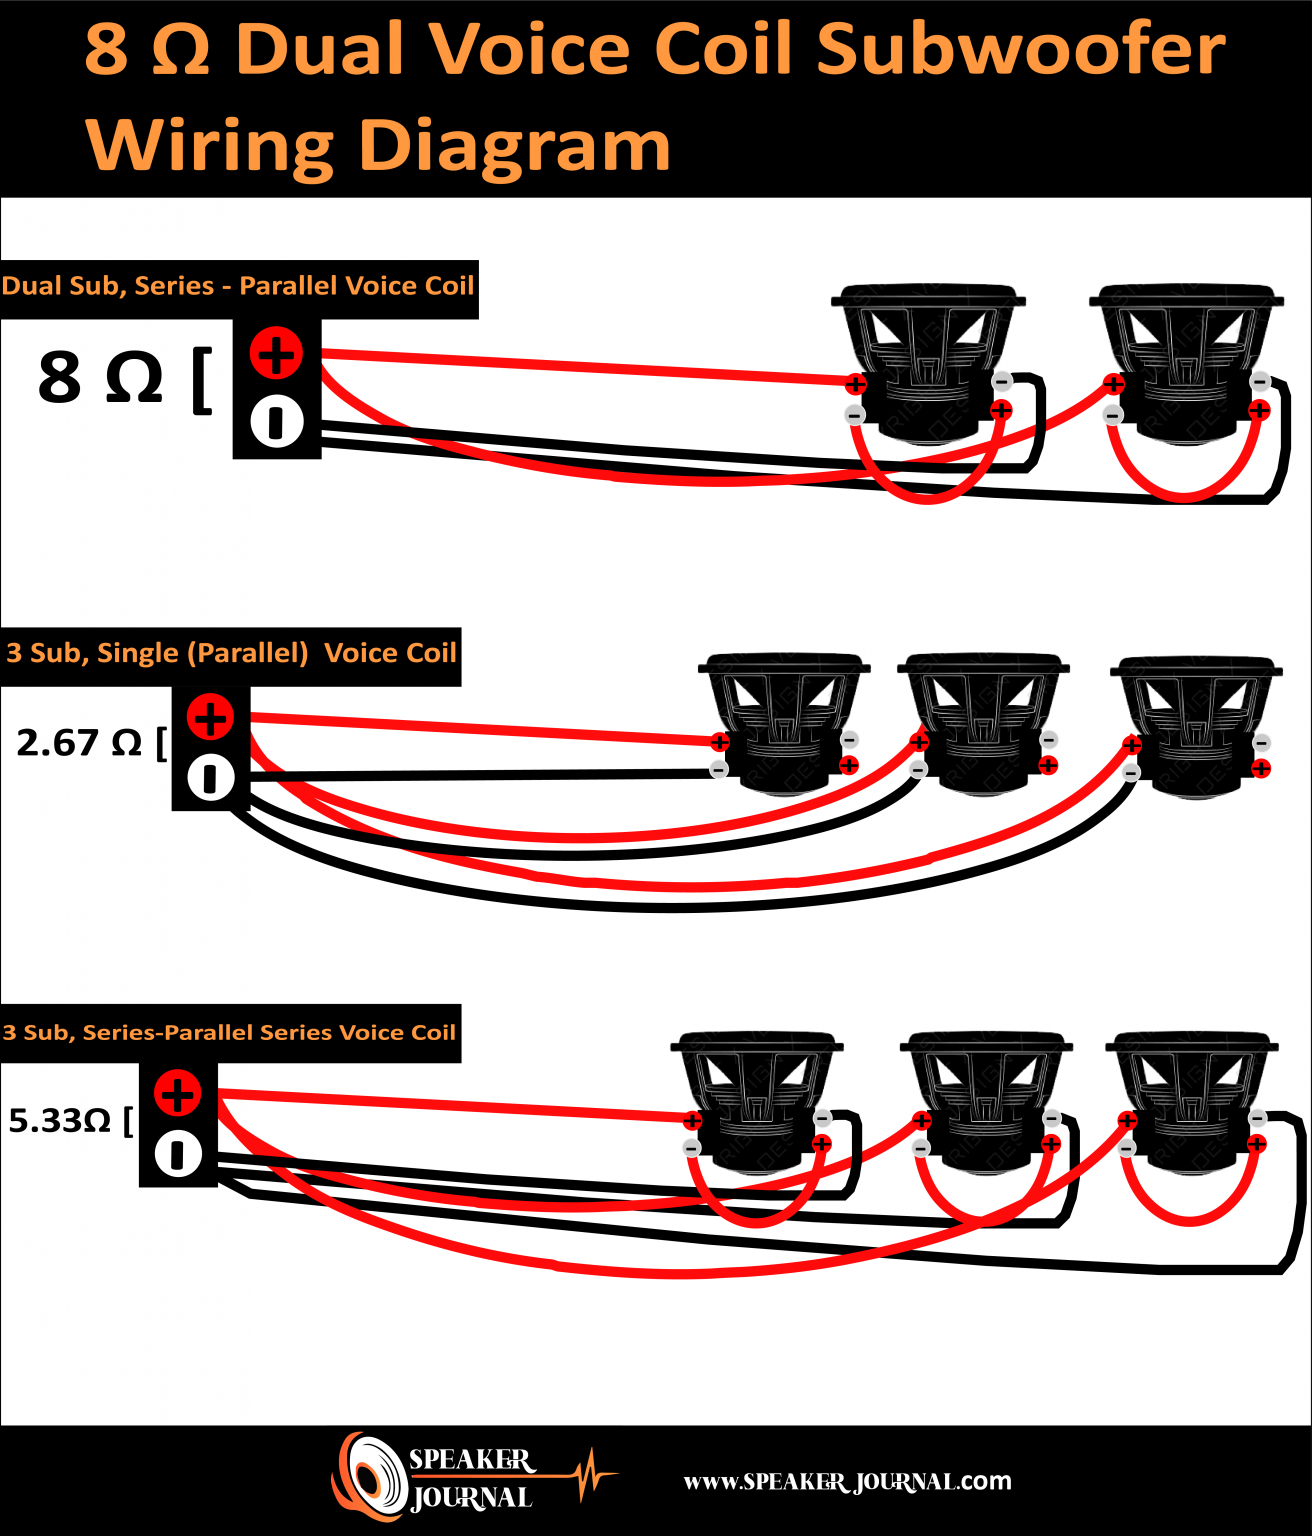 Subwoofer Wiring Diagrams Dual Voice Coil